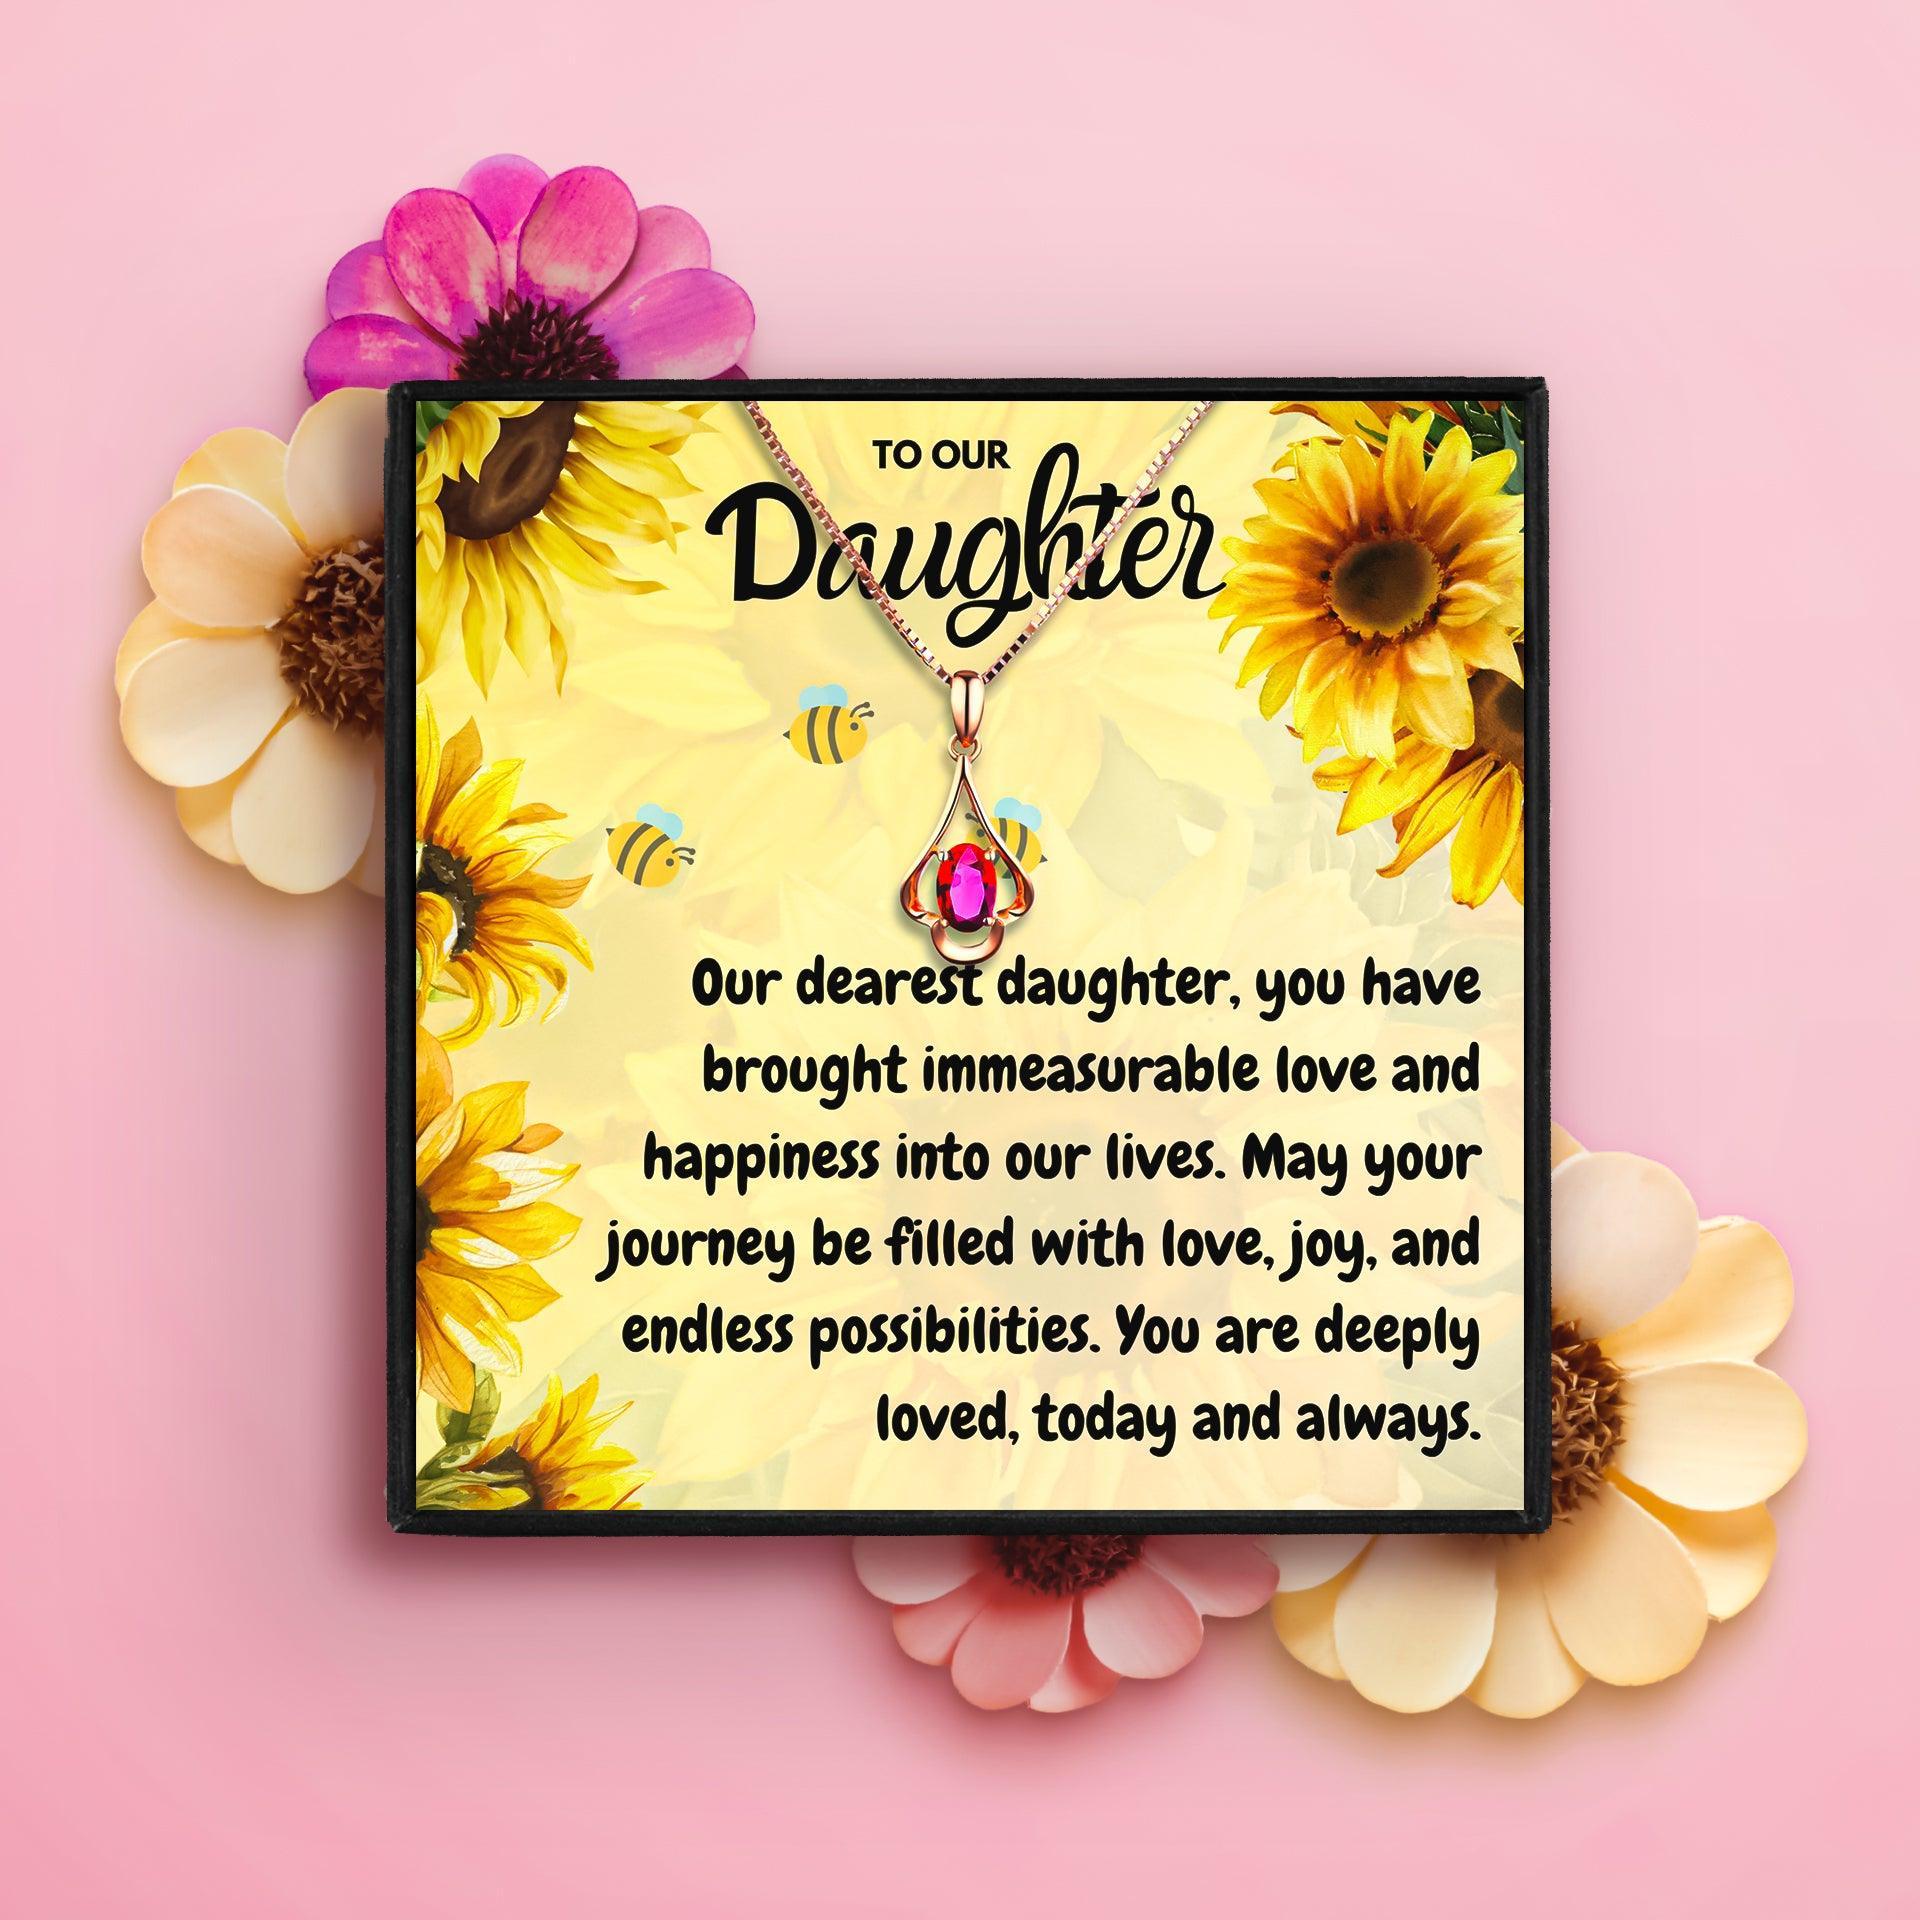 To Our Daughter Meaningful Daughter Necklace in 2023 | To Our Daughter Meaningful Daughter Necklace - undefined | For My Daughter necklace, Meaningful Daughter Necklaces, Mother Daughter Necklace, To my daughter necklace, To Our Daughter necklace | From Hunny Life | hunnylife.com